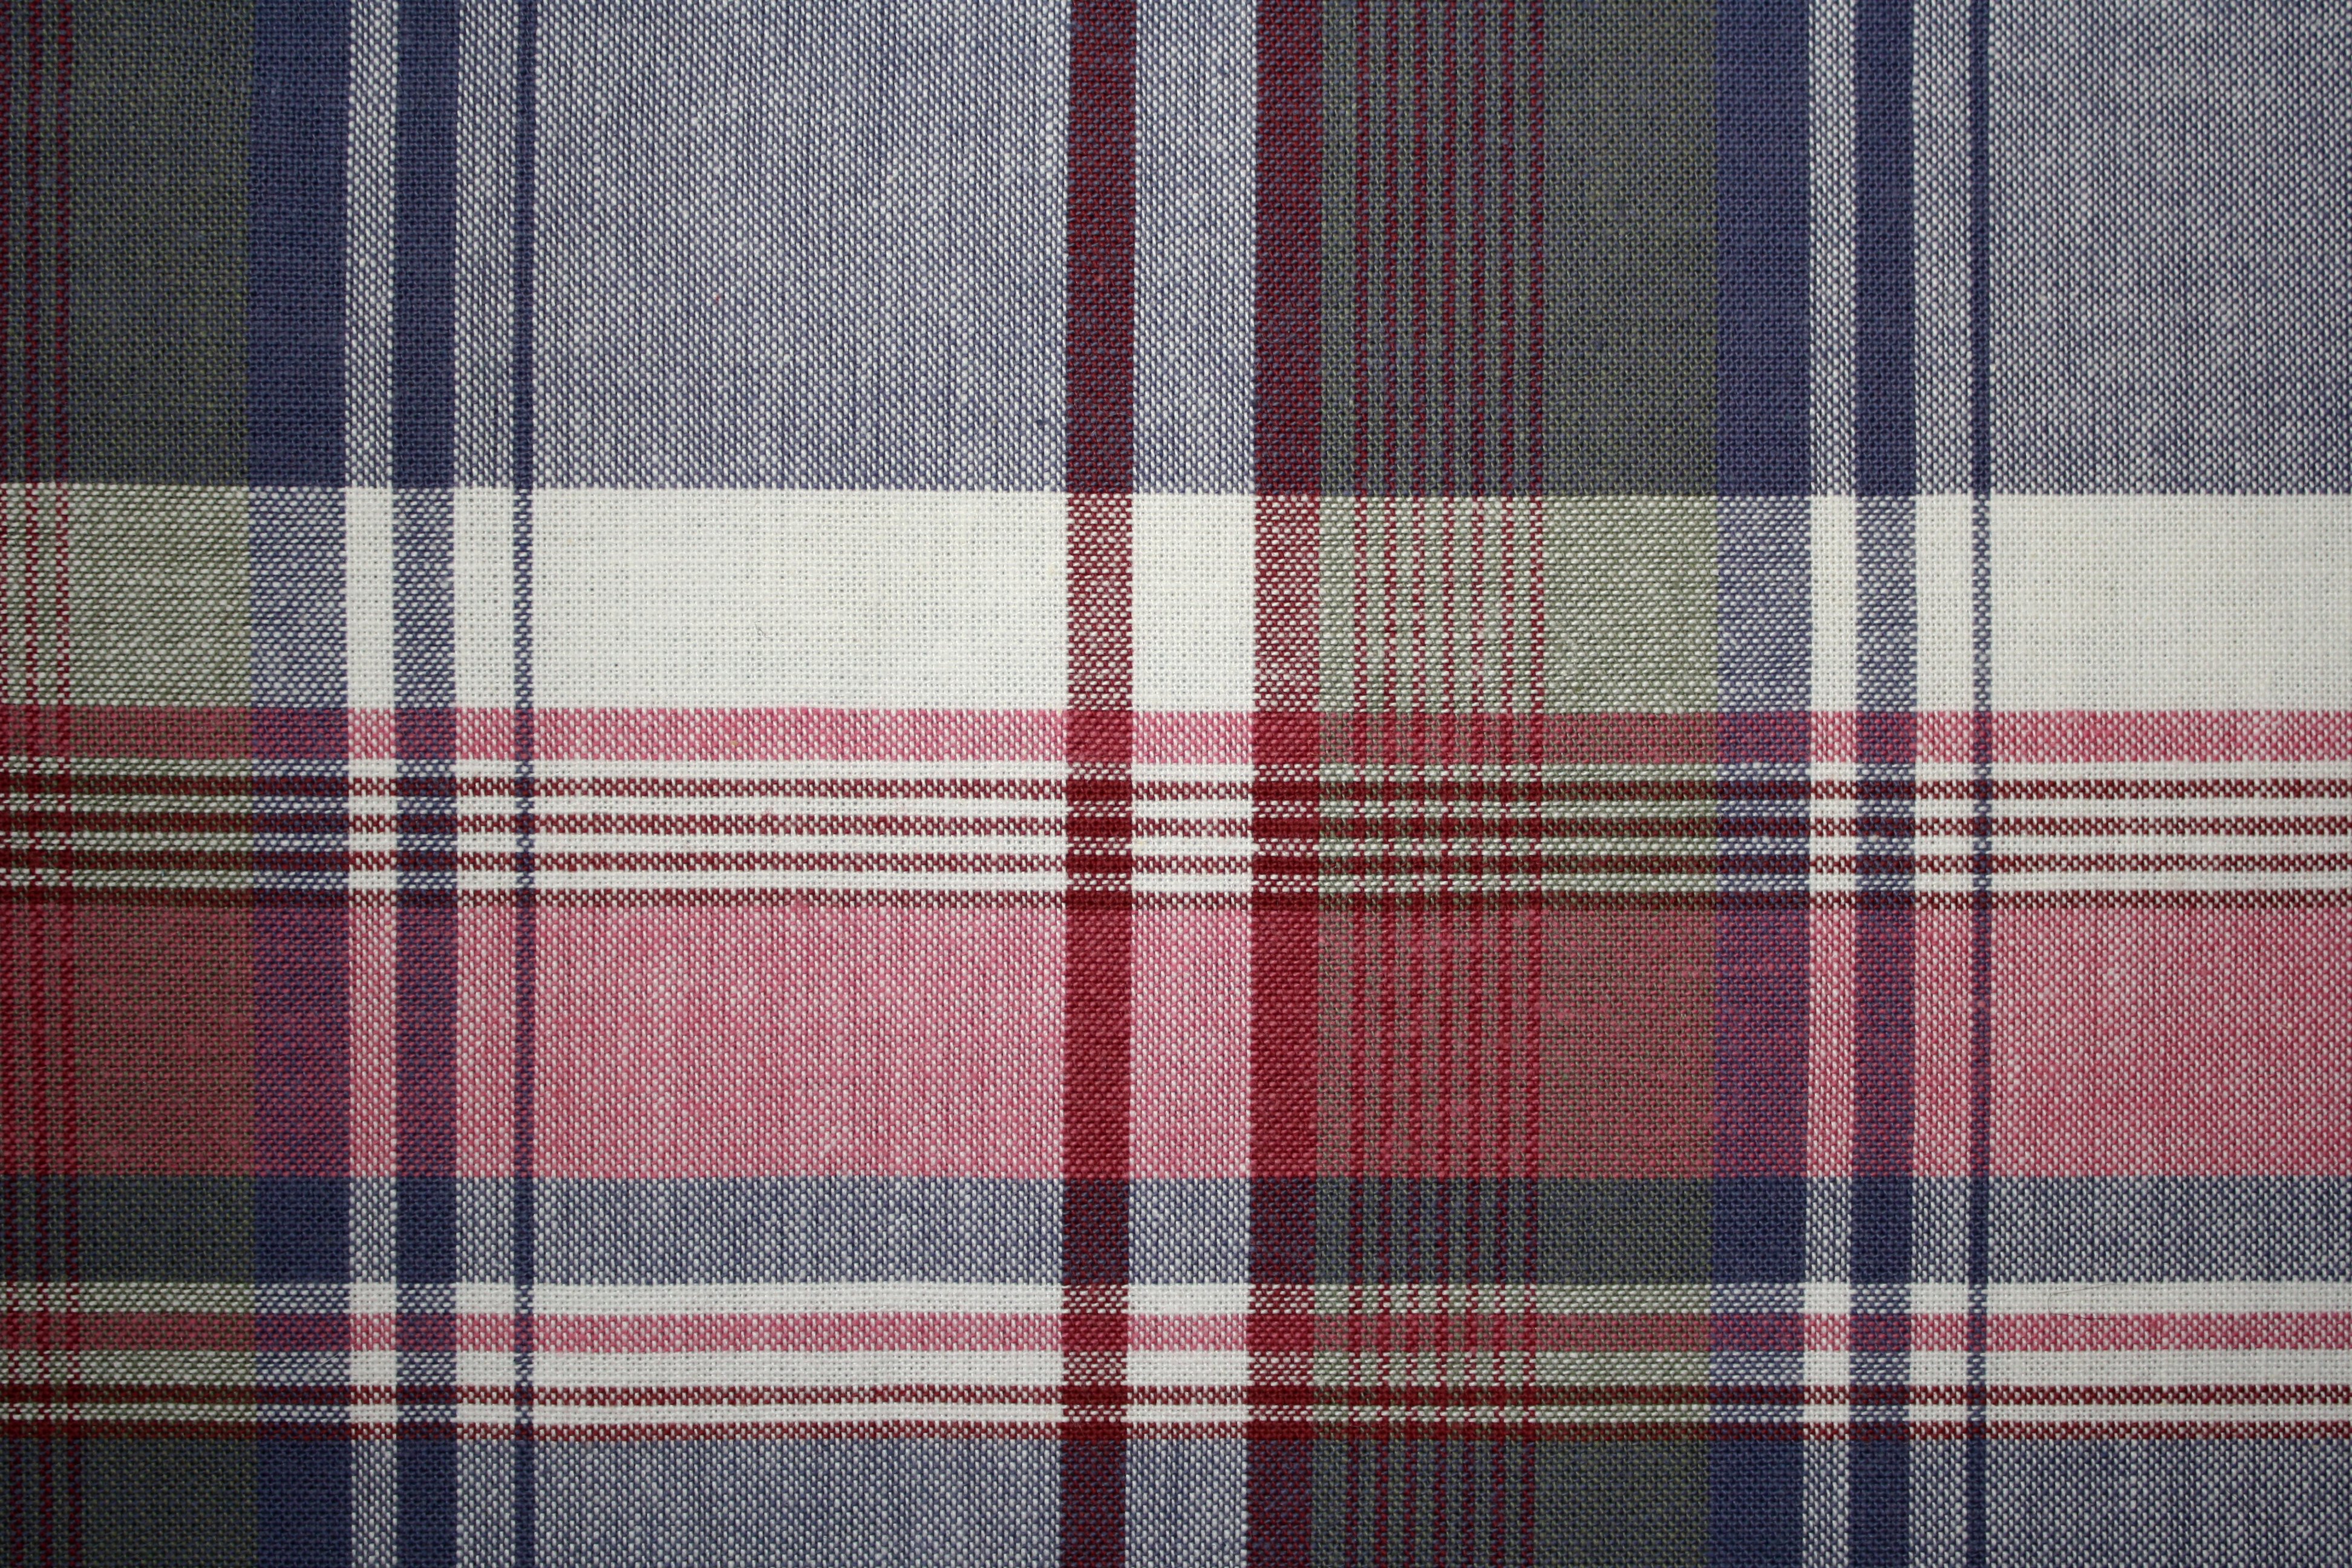 Plaid Fabric Texture   Red and Blue with Green   Free High Resolution